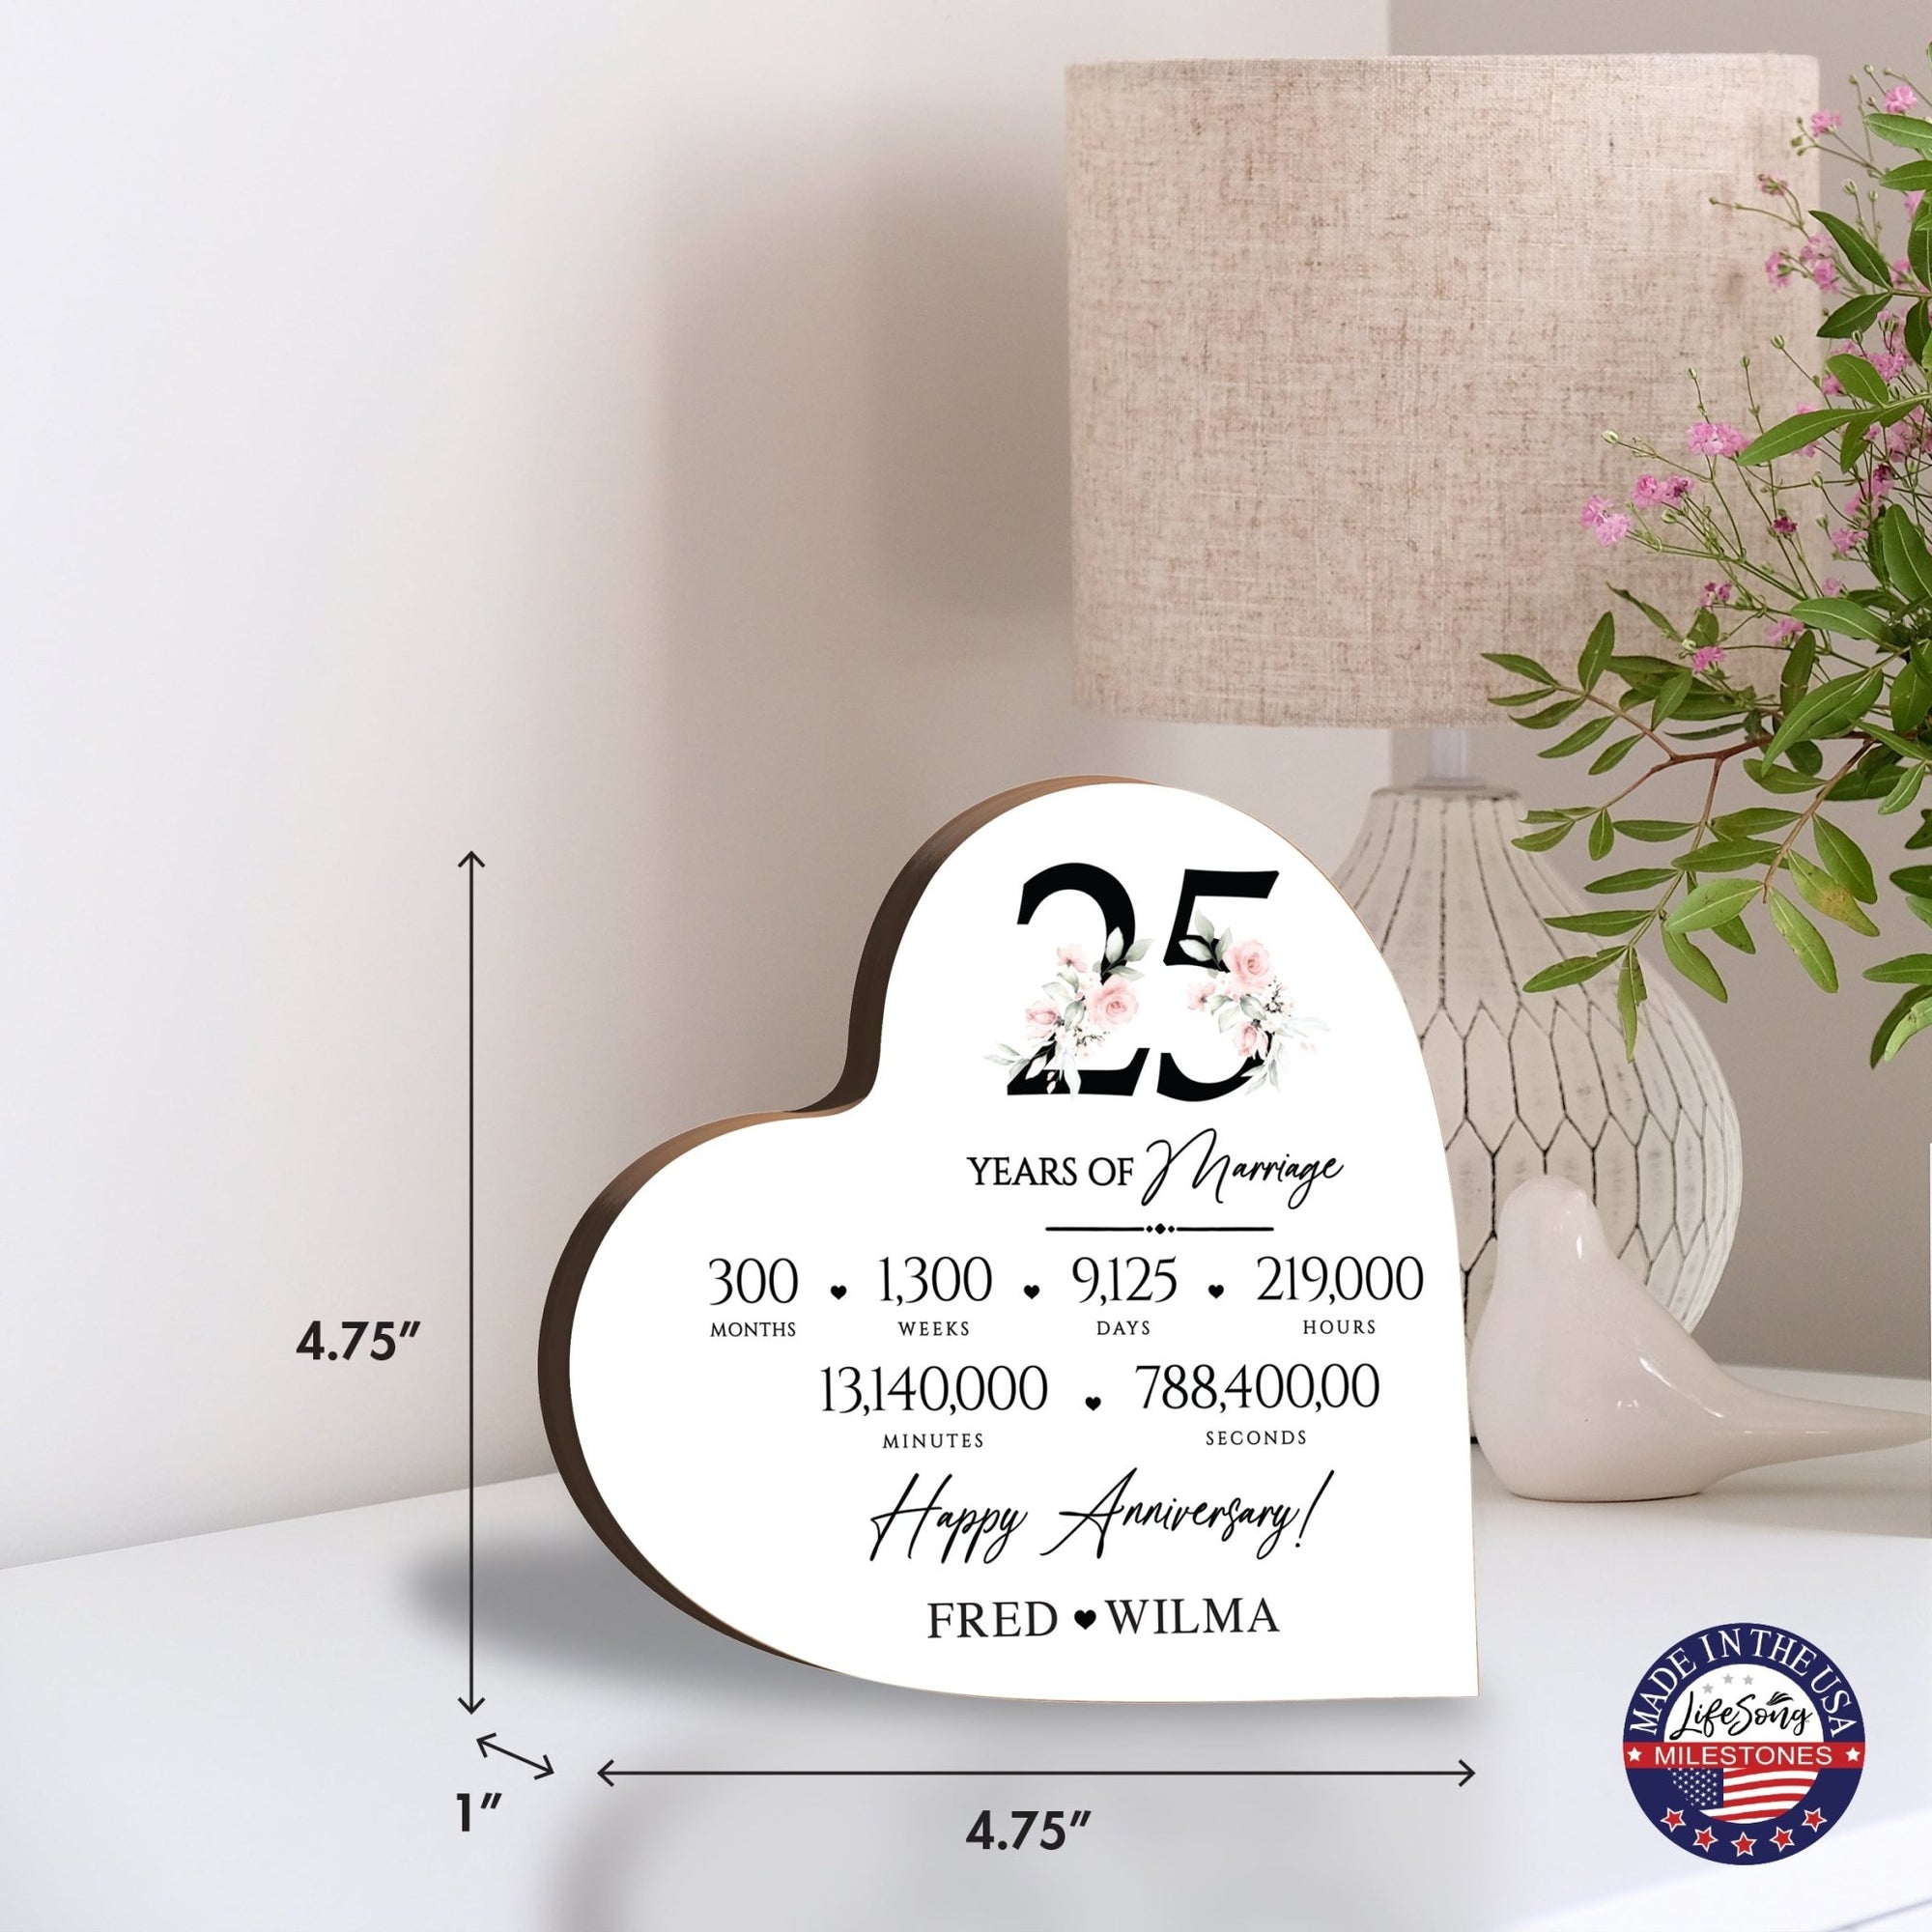 Personalized Wooden Anniversary Heart Shaped Signs - 25th Anniversary - LifeSong Milestones